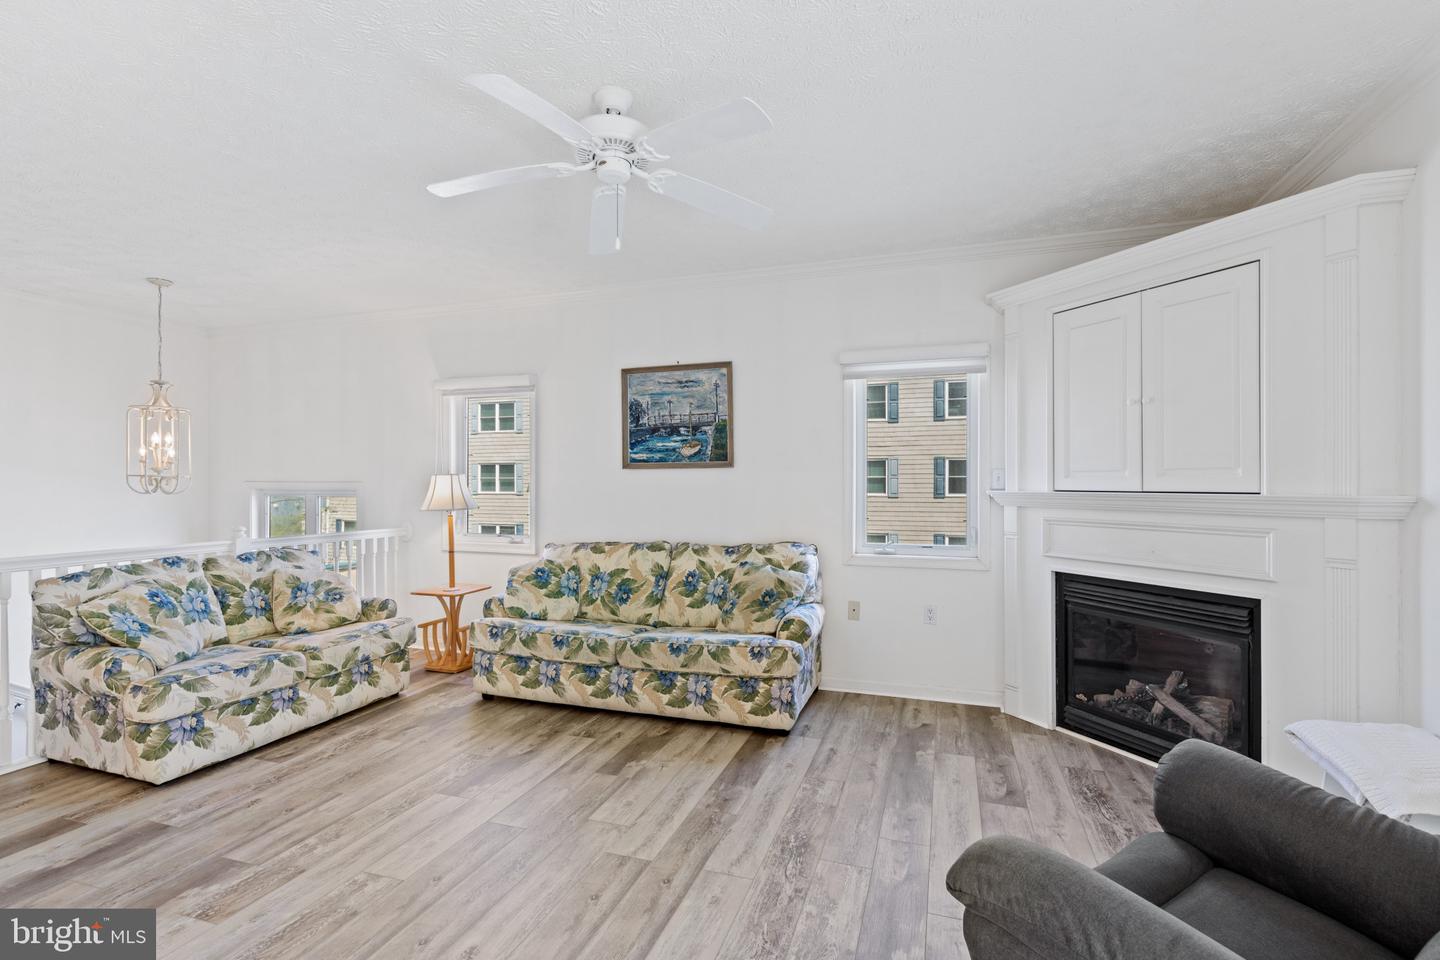 MDWO2015322-802986556058-2024-04-16-15-31-32 14 45th St #203 | Ocean City, MD Real Estate For Sale | MLS# Mdwo2015322  - 1st Choice Properties